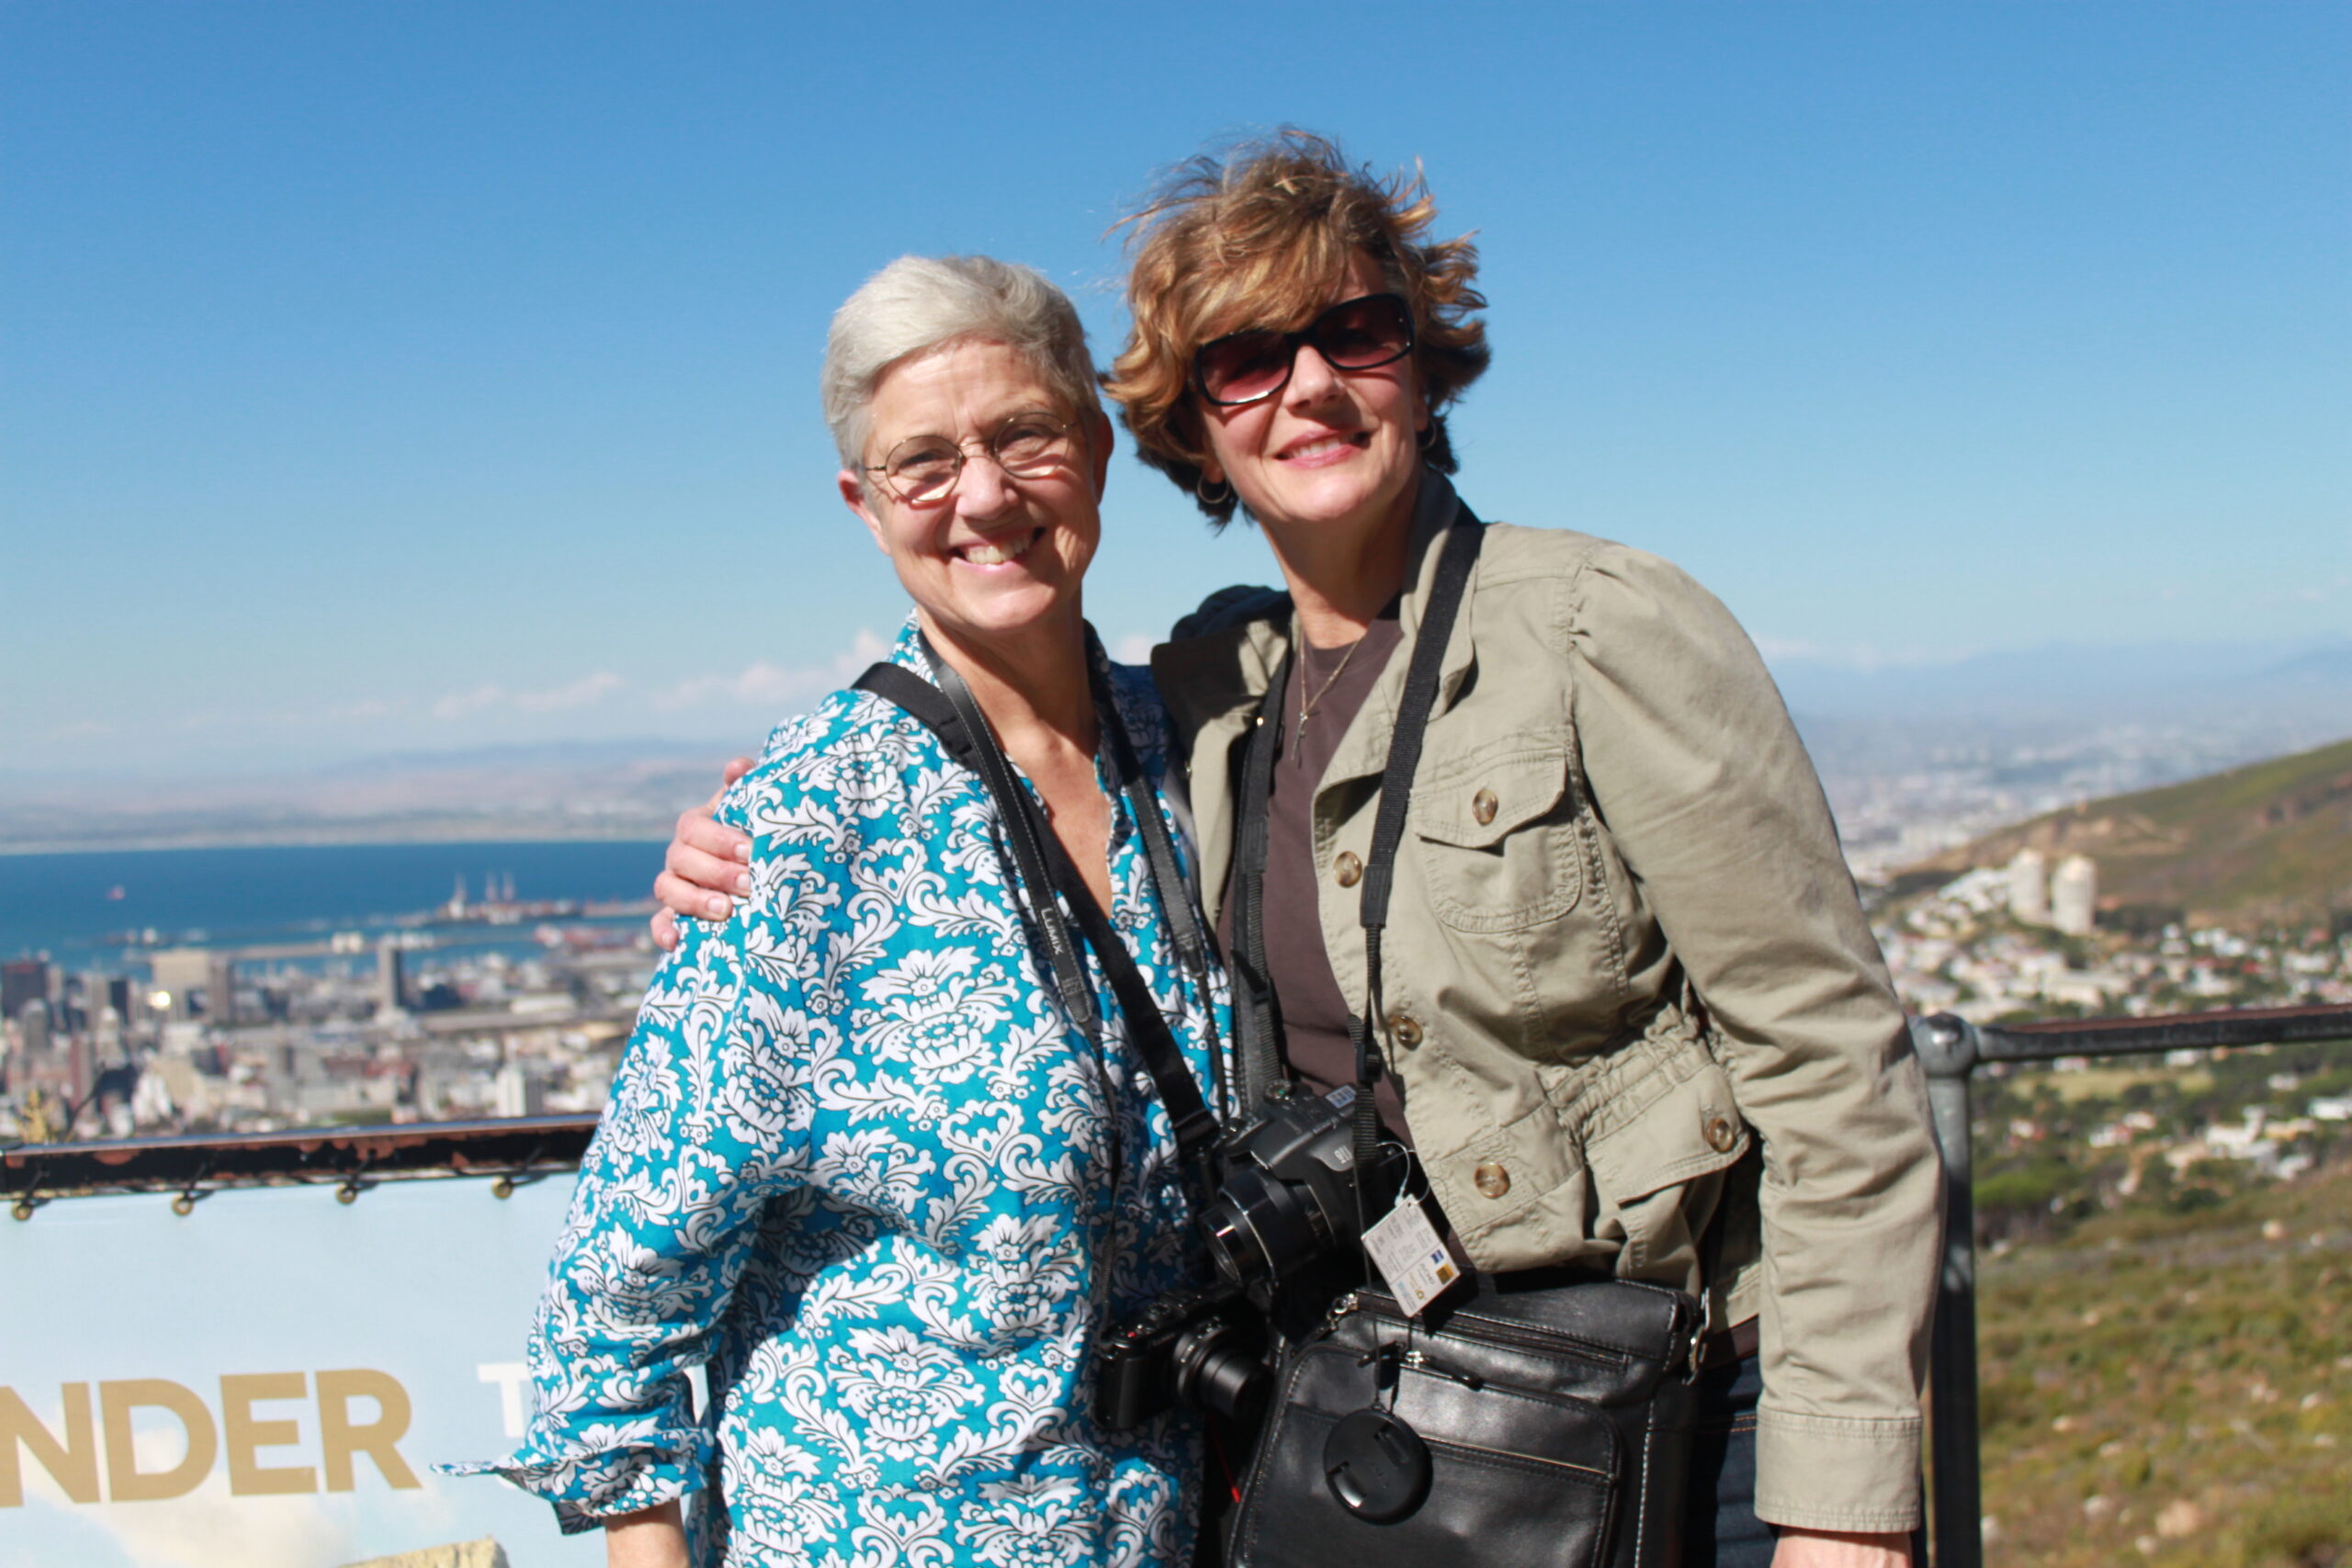 San Francisco lesbian philanthropists Tracy Gary, left, and Jody Cole, right, two of the 17 participants in Atlantic Philanthropies LGBT donor tour of South Africa. (Photo: Inka von Sternenfels)